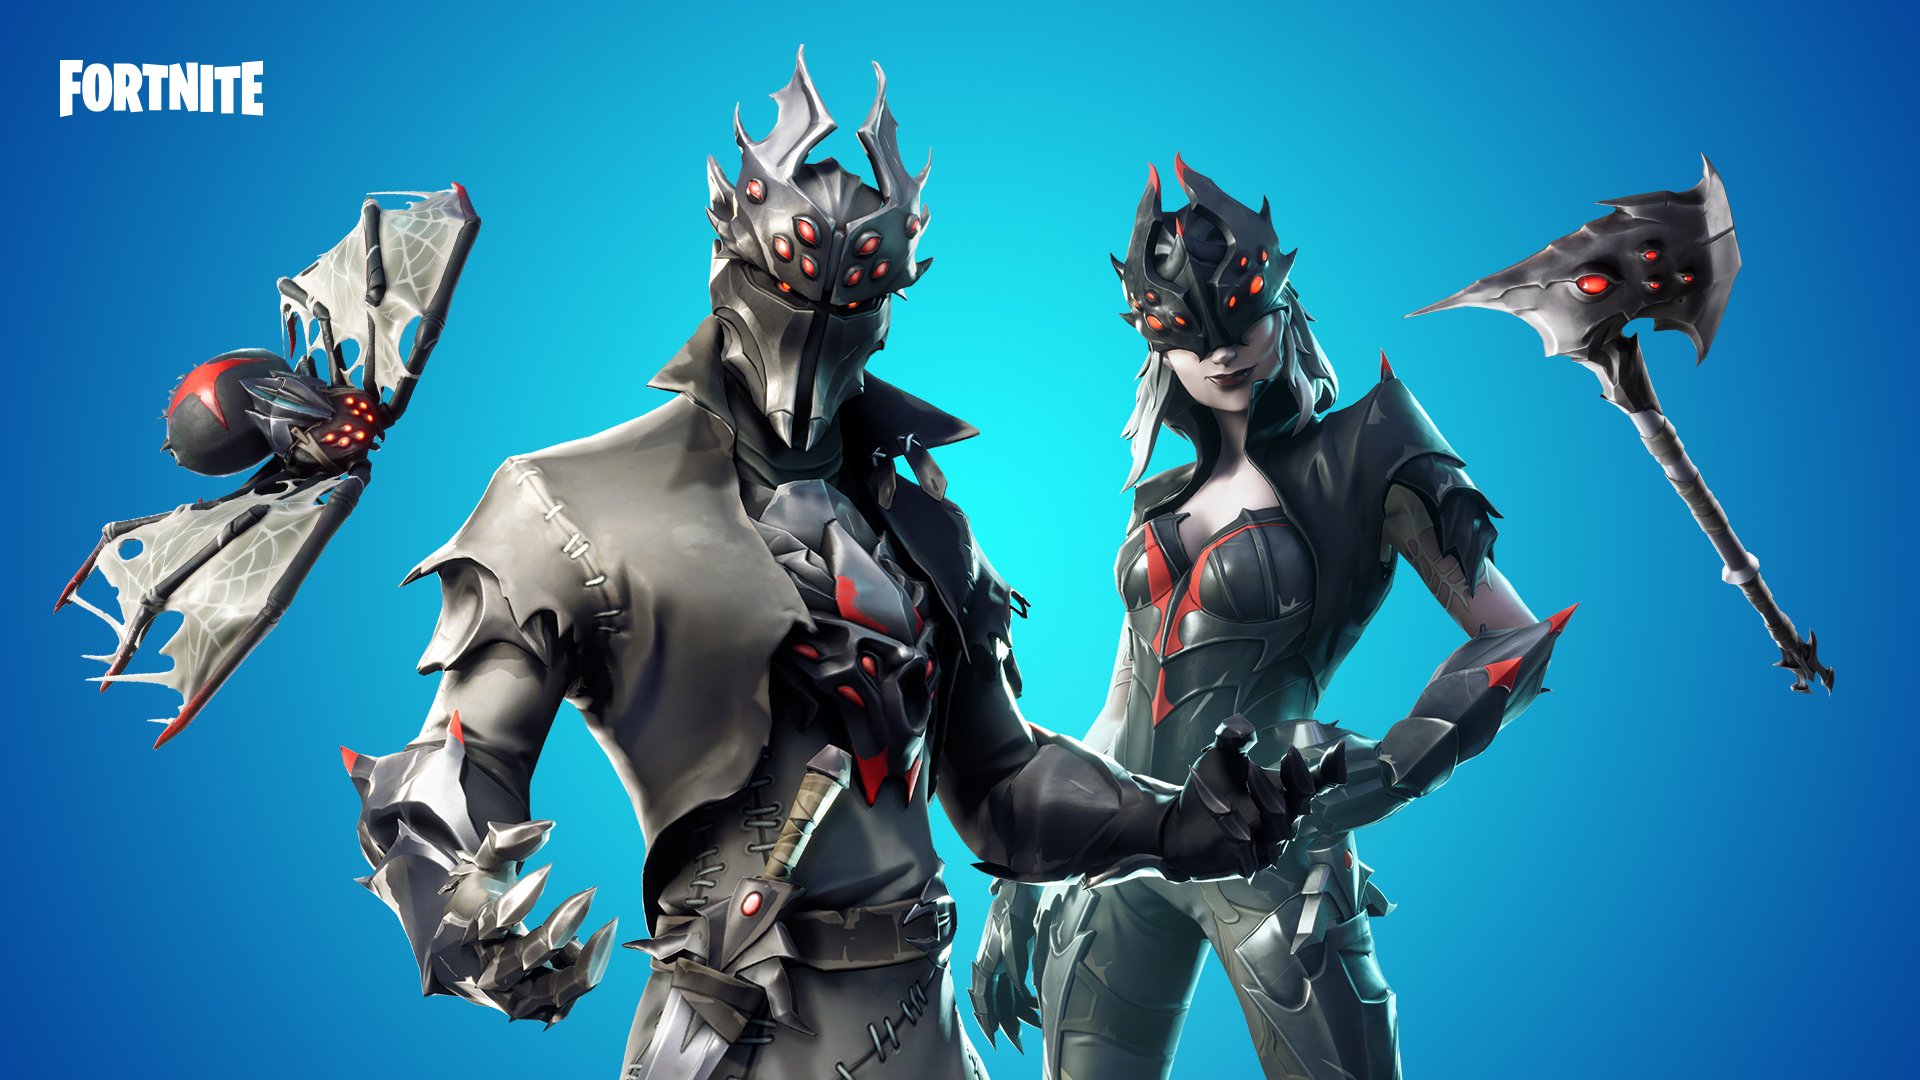 Fortnite on Twitter: "🐇 Cute and creepy creatures make for ... - 1920 x 1080 jpeg 237kB